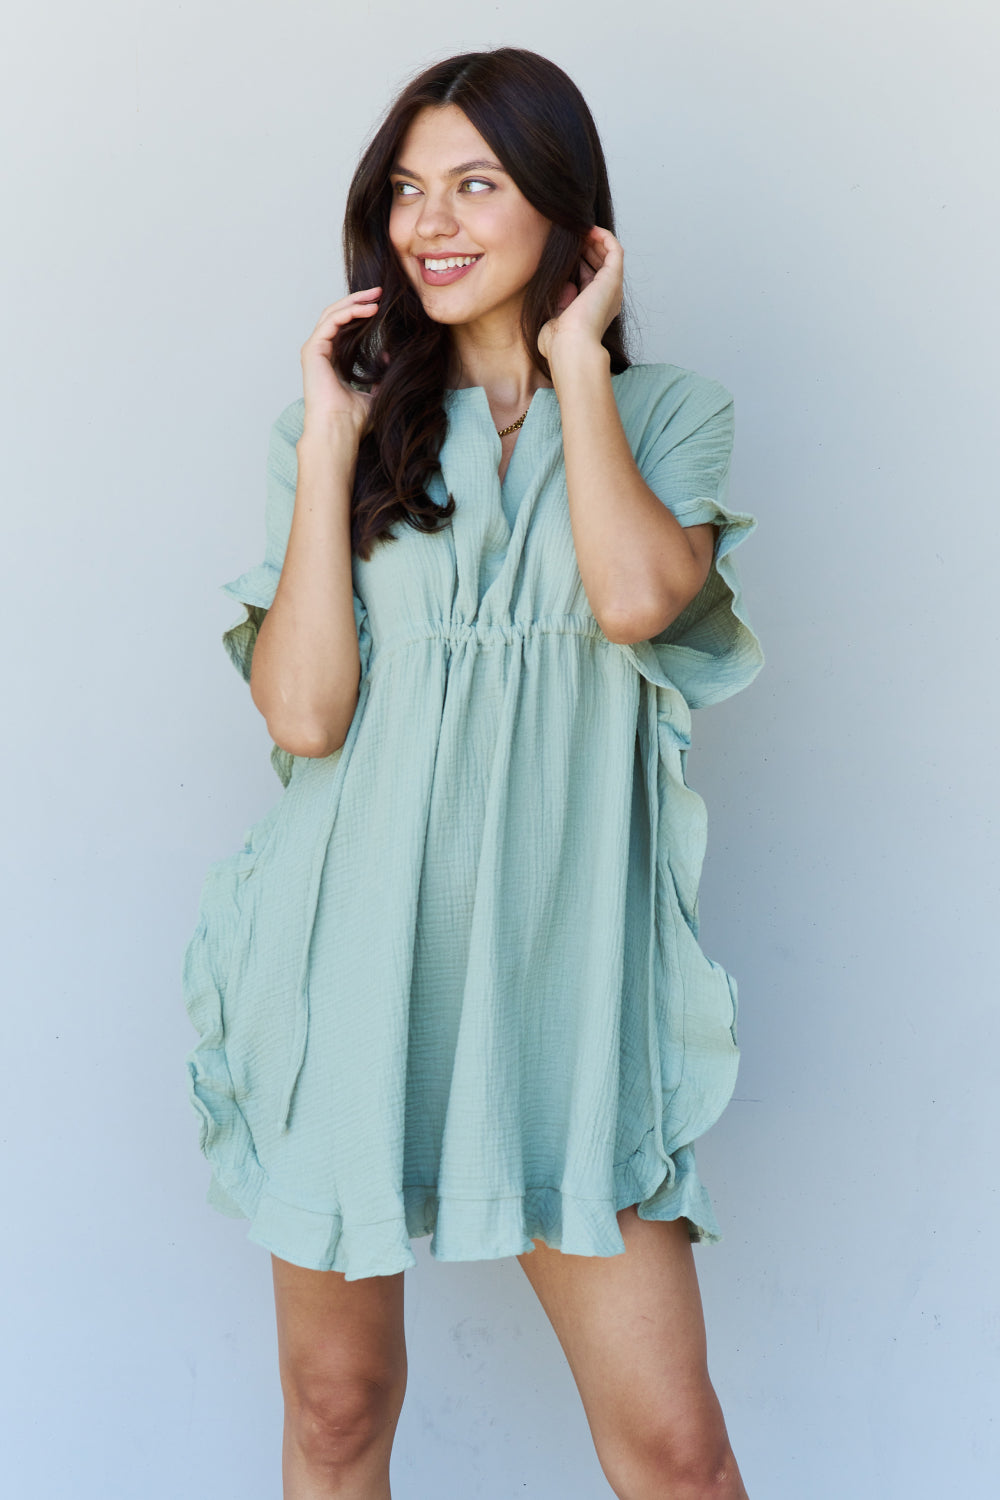 Ninexis Out Of Time Full Size Ruffle Hem Dress with Drawstring Waistband in Light Sage - Mulberry Skies